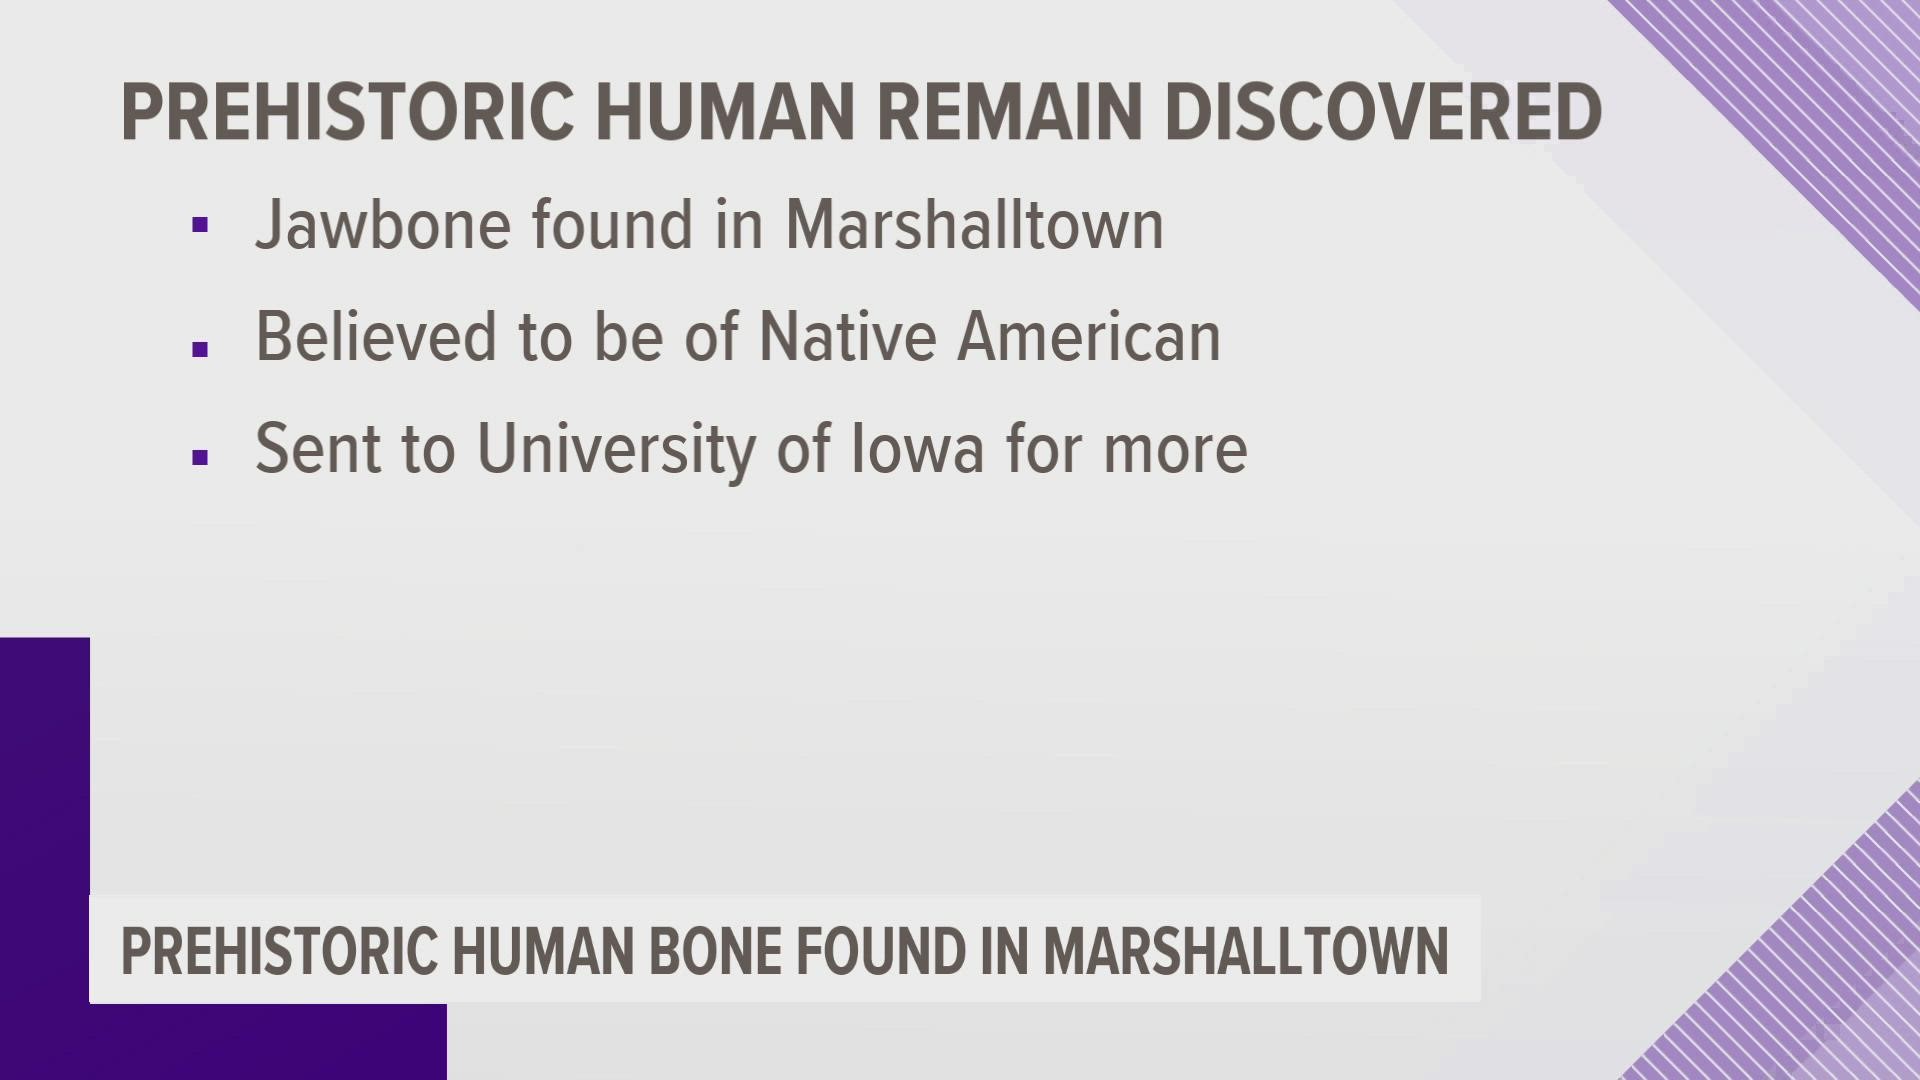 The bone is believed to be that of a prehistoric Native American jaw. It was found last month in Marshalltown by Marshall County Conservation staff,